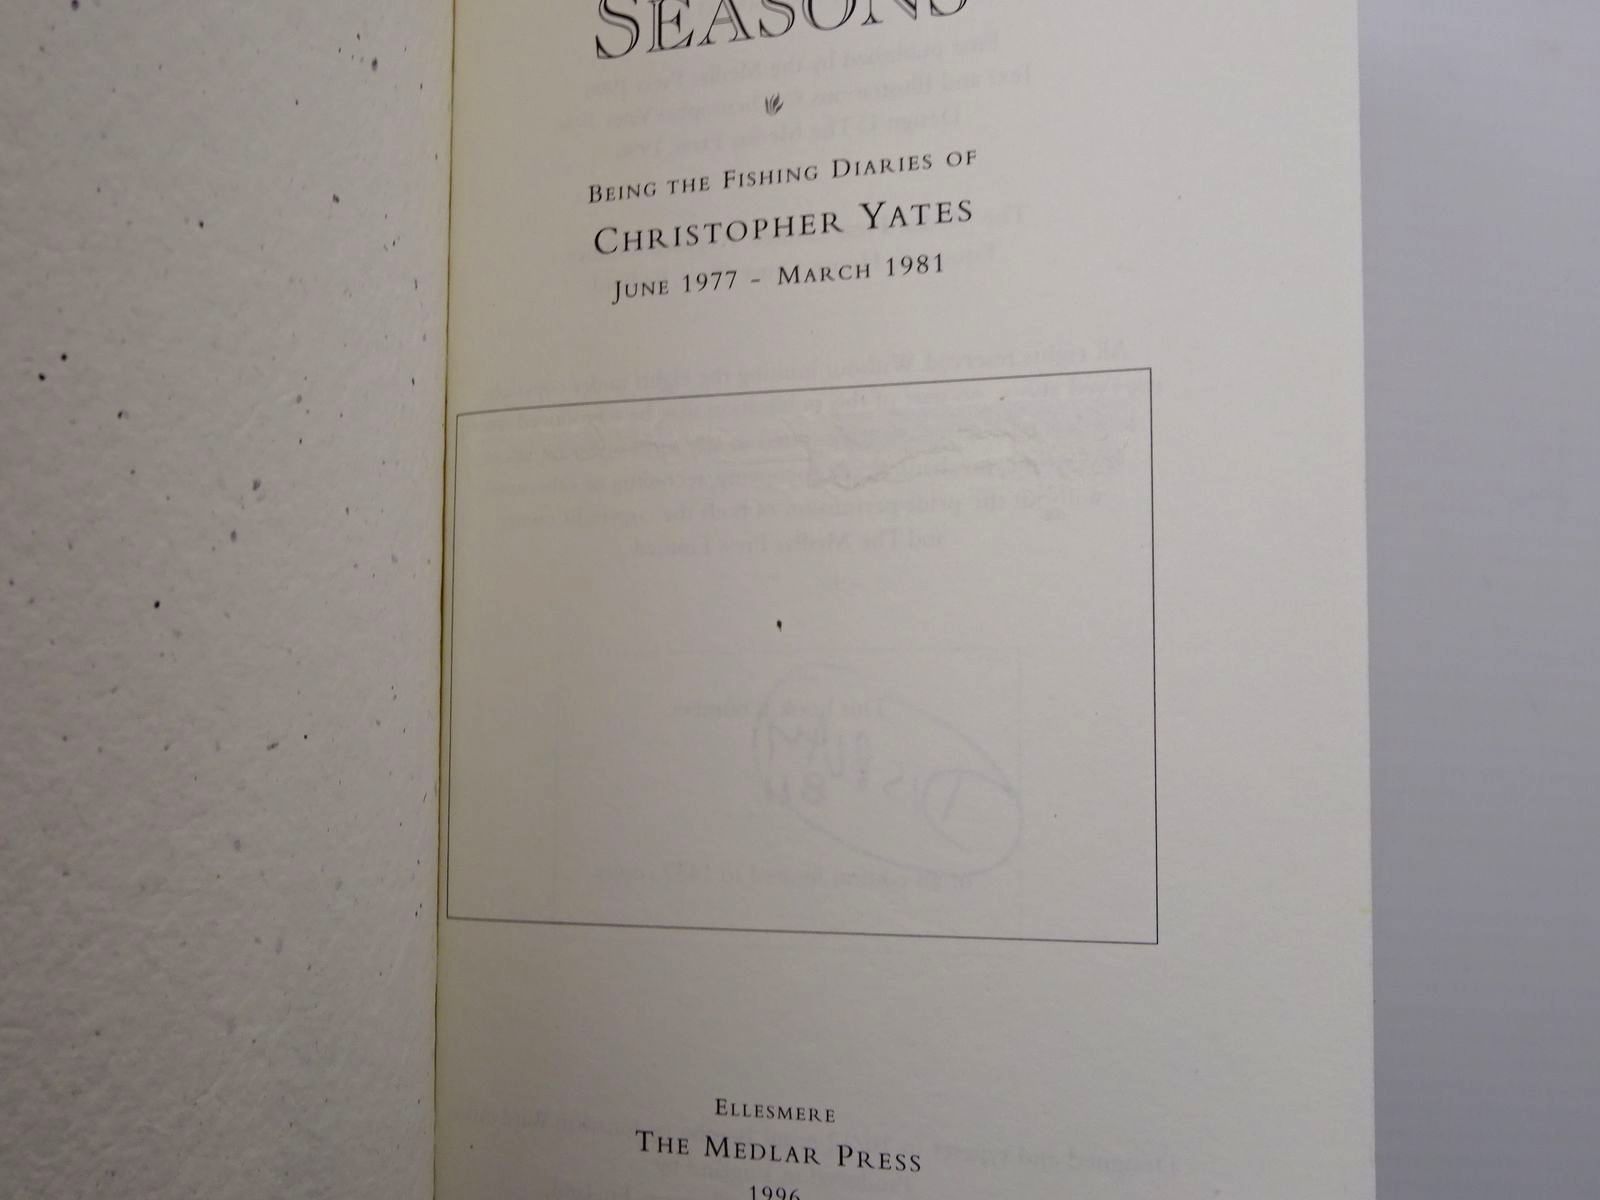 Photo of FOUR SEASONS BEING THE FISHING DIARIES OF CHRISTOPHER YATES JUNE 1977 - MARCH 1981 written by Yates, Christopher published by The Medlar Press (STOCK CODE: 2129556)  for sale by Stella & Rose's Books